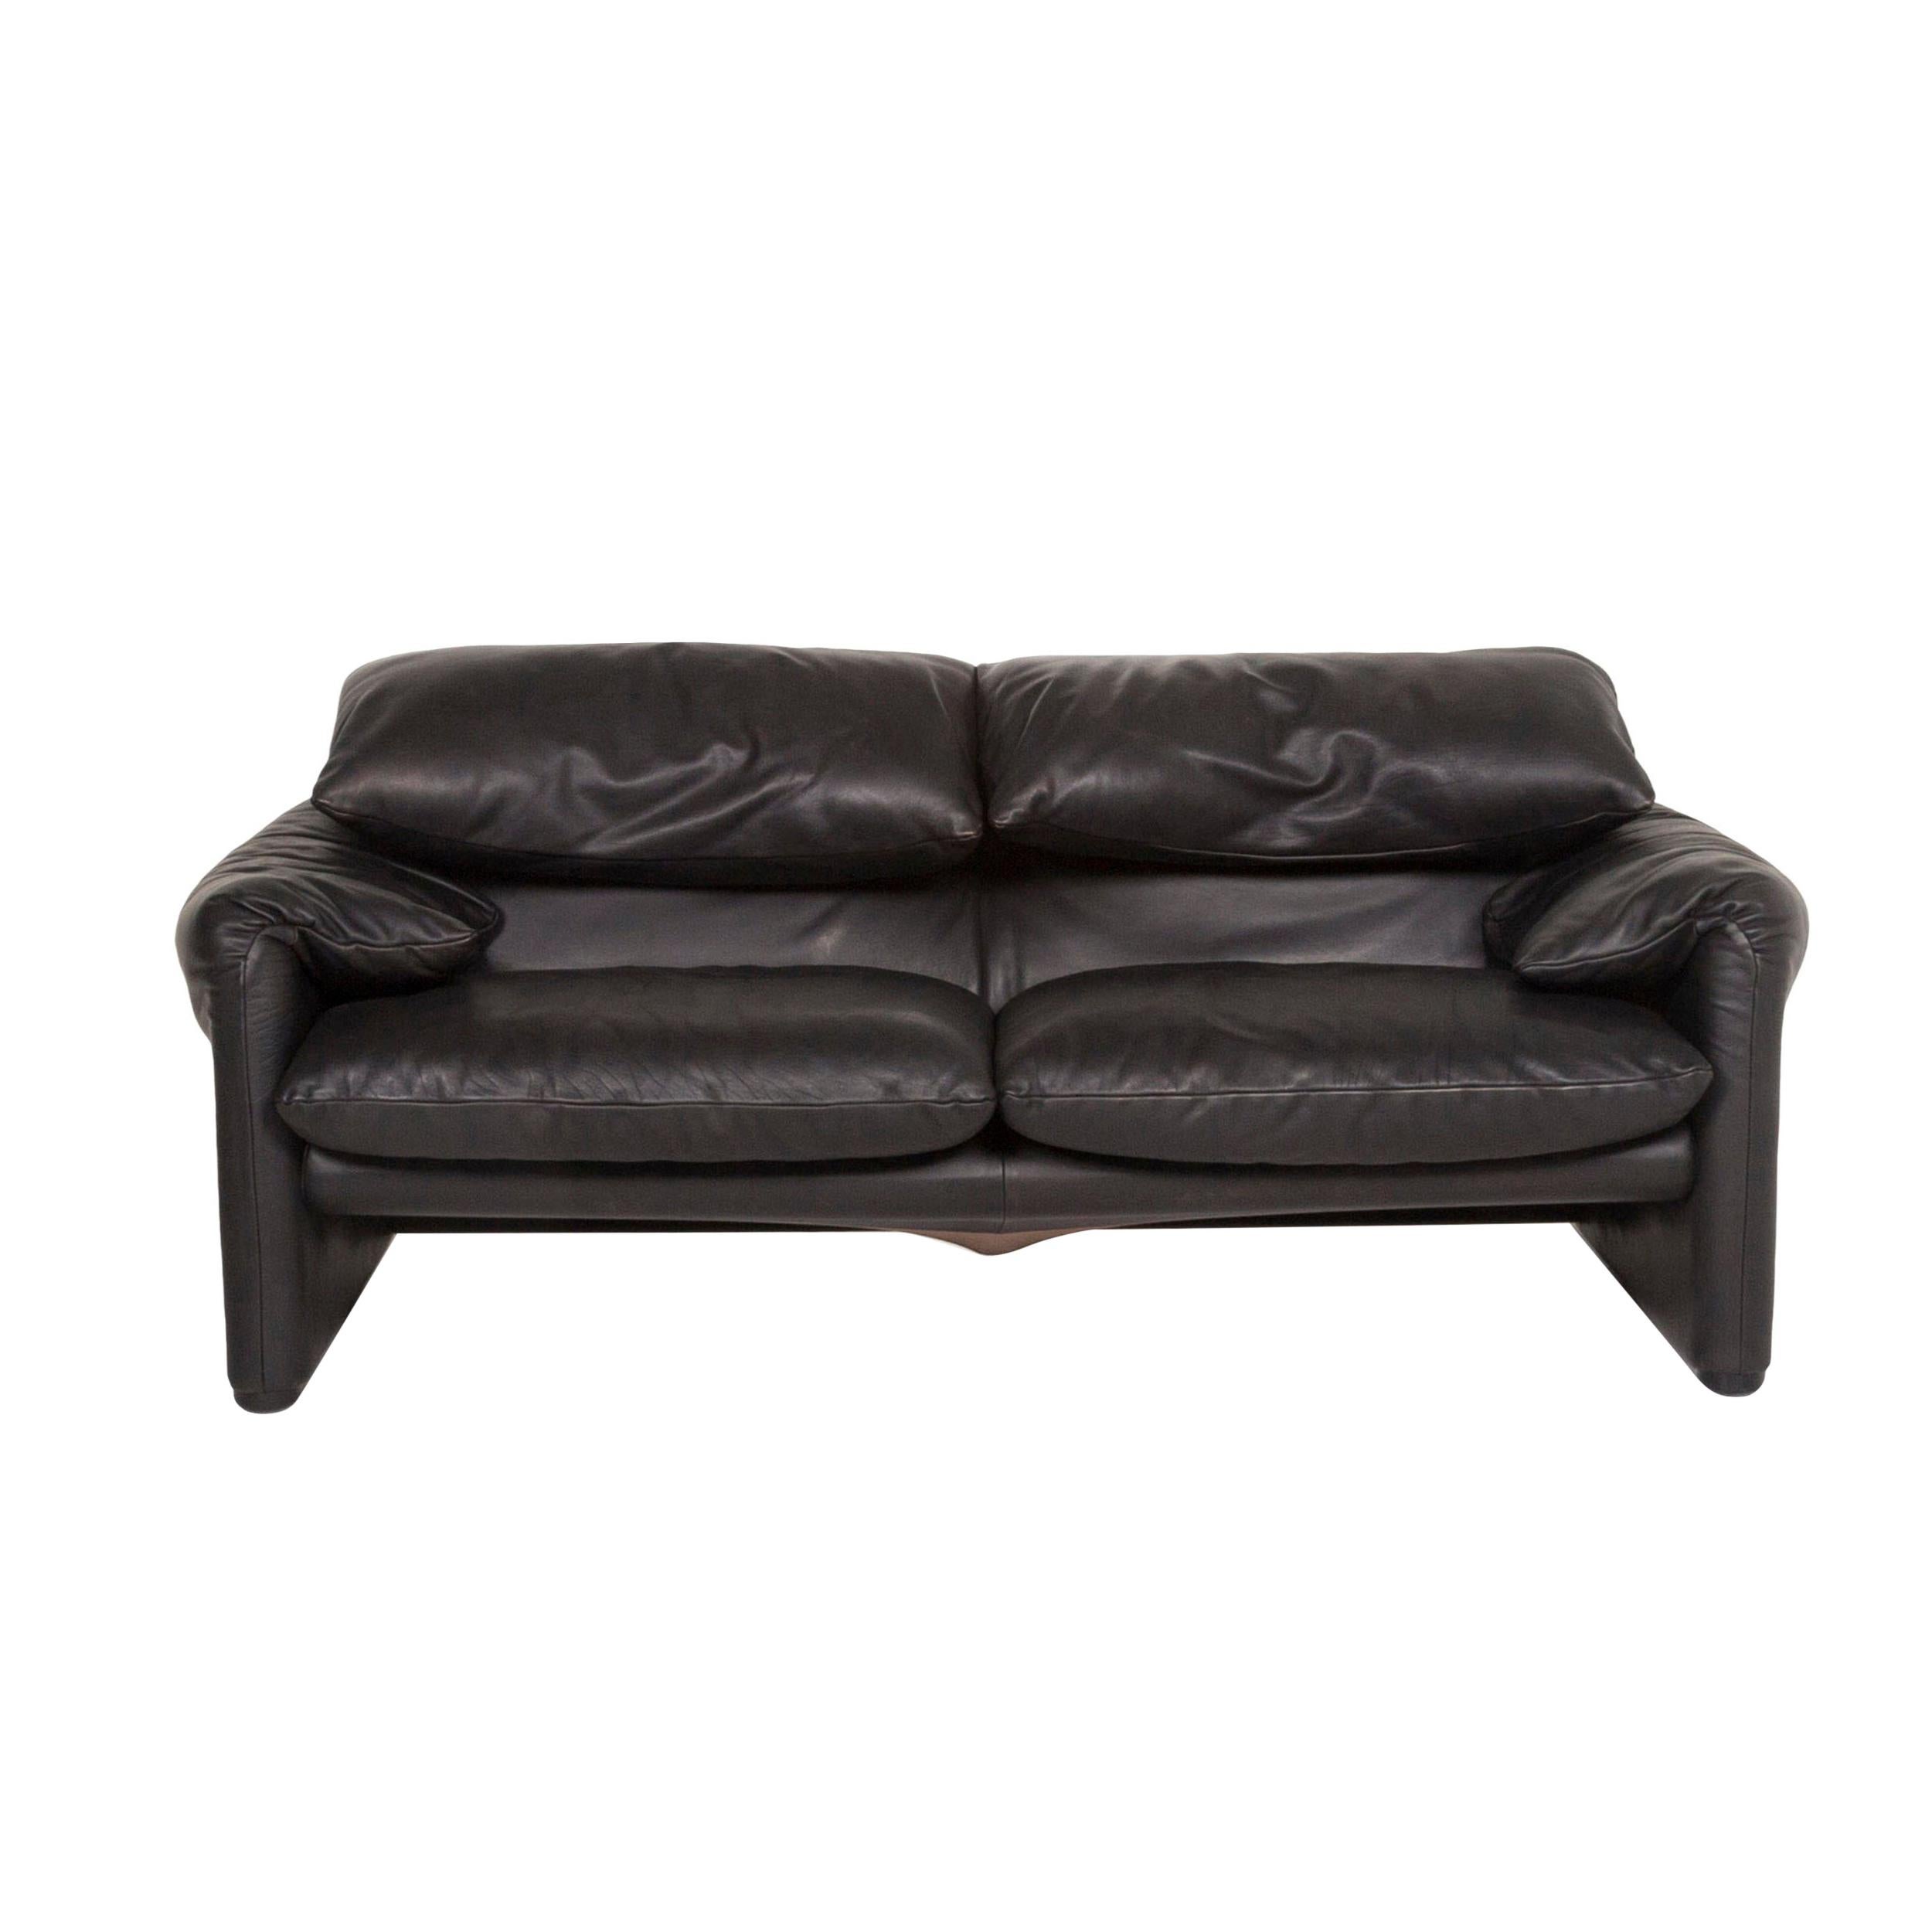 Cassina Maralunga Leather Sofa Black Two-Seat Function Couch